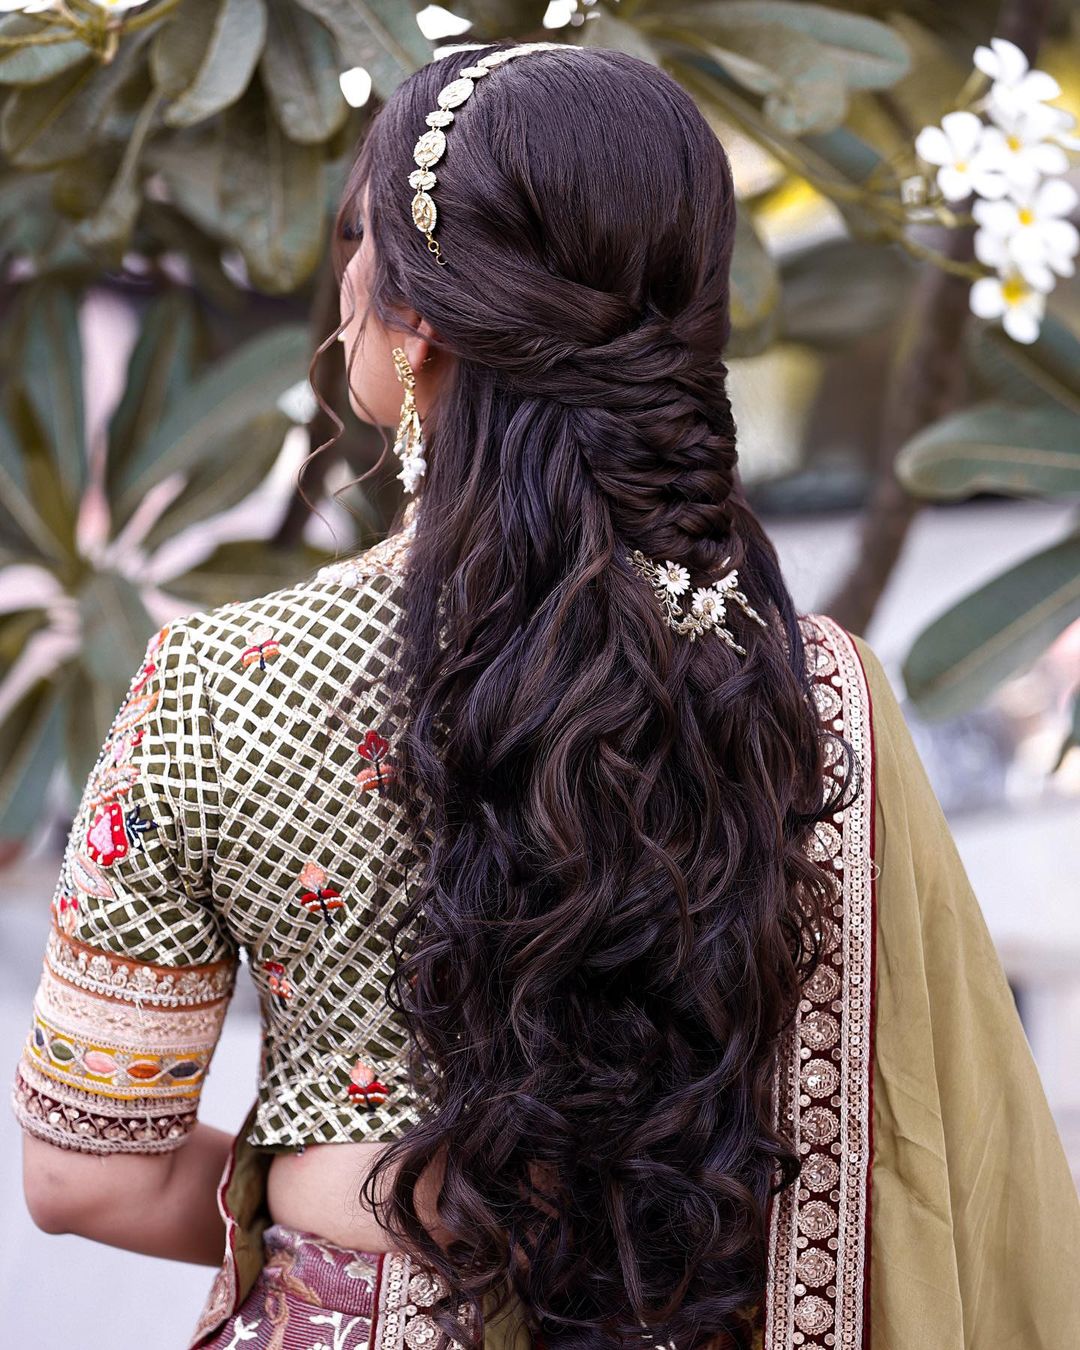 Messy Hairstyles  बल क लए हयर सटइल  Latest Hairstyles For Wedding  Function  messy look hair style for wedding function  HerZindagi